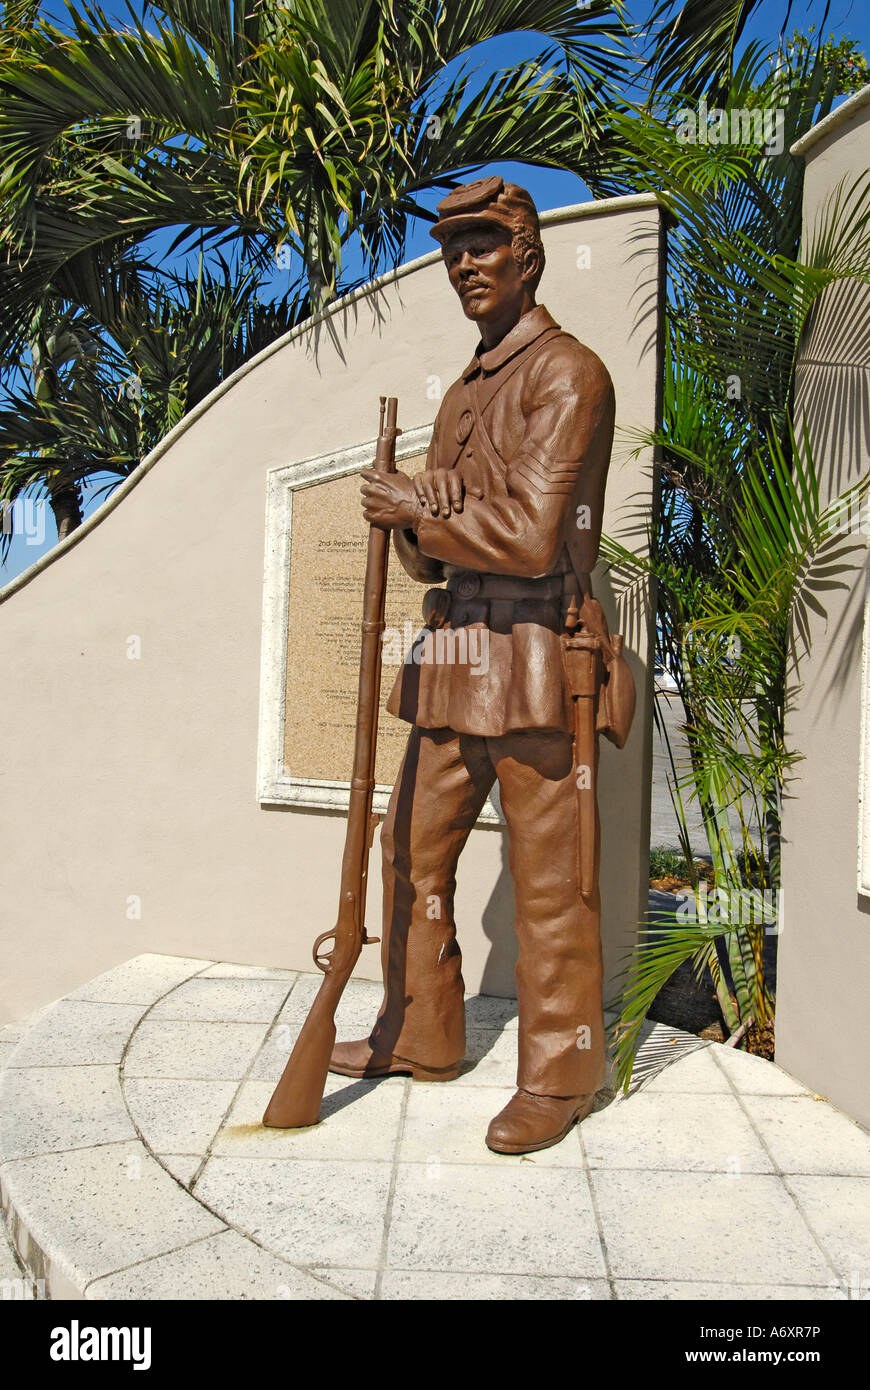 Fort Ft Myers Centennial Park Memorial to the Colored Black Troops serving in the Civil war Stock Photo